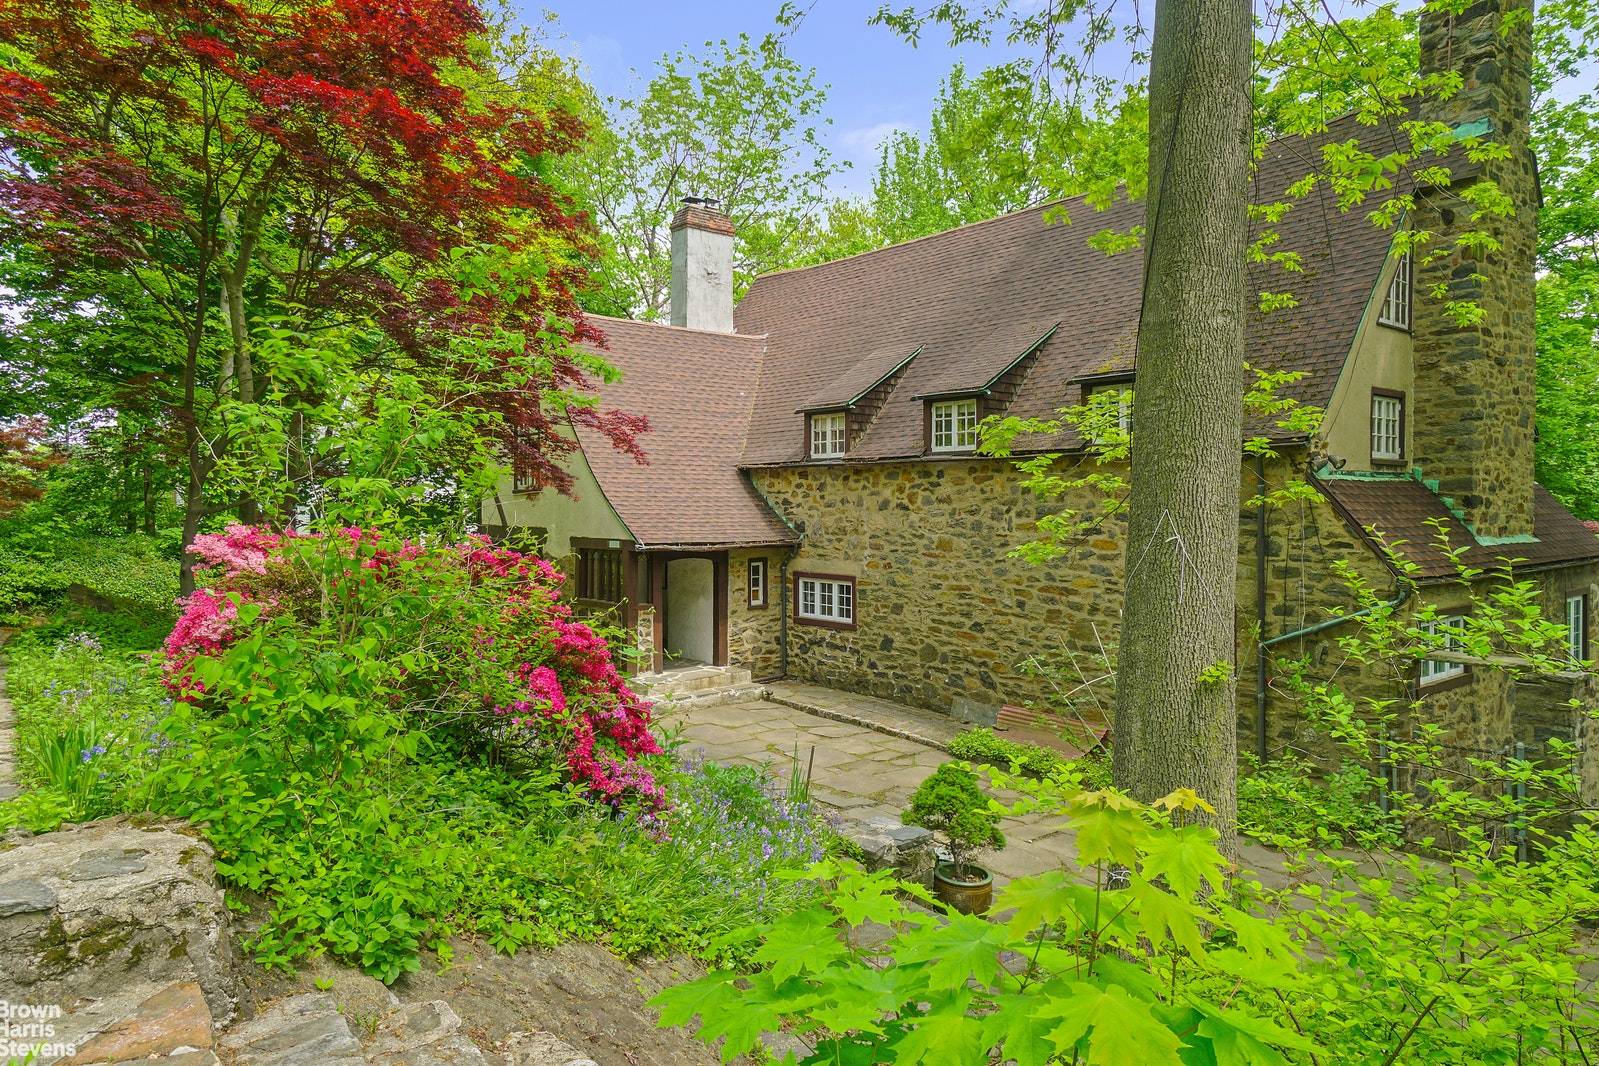 An elegant 1930's Medieval Revival home designed by noted architect Frank J Forster and later updated by Dwight James Baum.